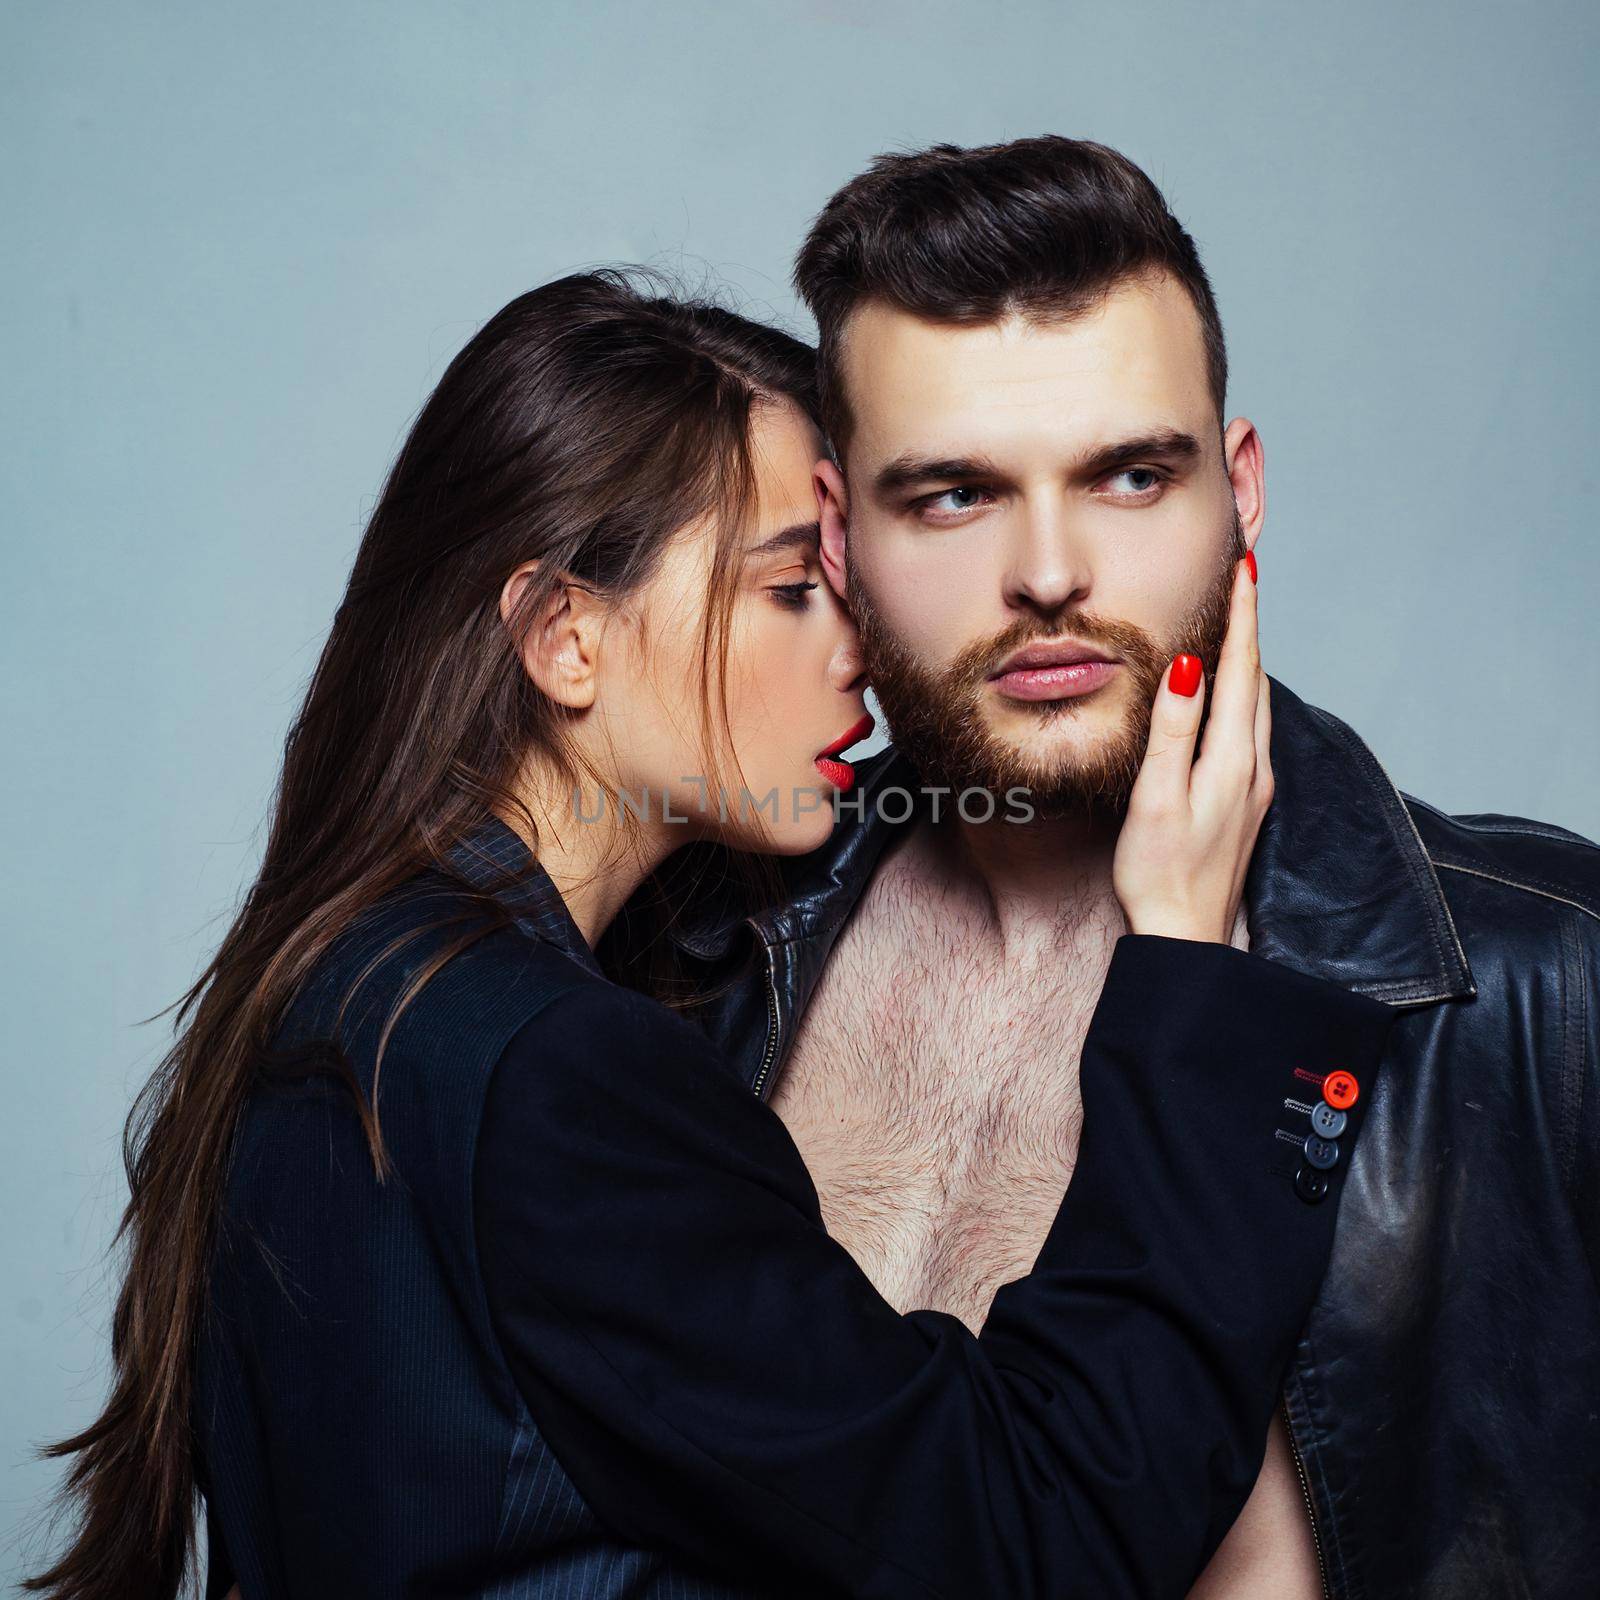 Girlfriend passionate red lips and man leather jacket. Passionate hug. Couple passionate people in love. Passion fashion. Man brutal well groomed macho and attractive feminine girl long hair cuddling by Tverdokhlib